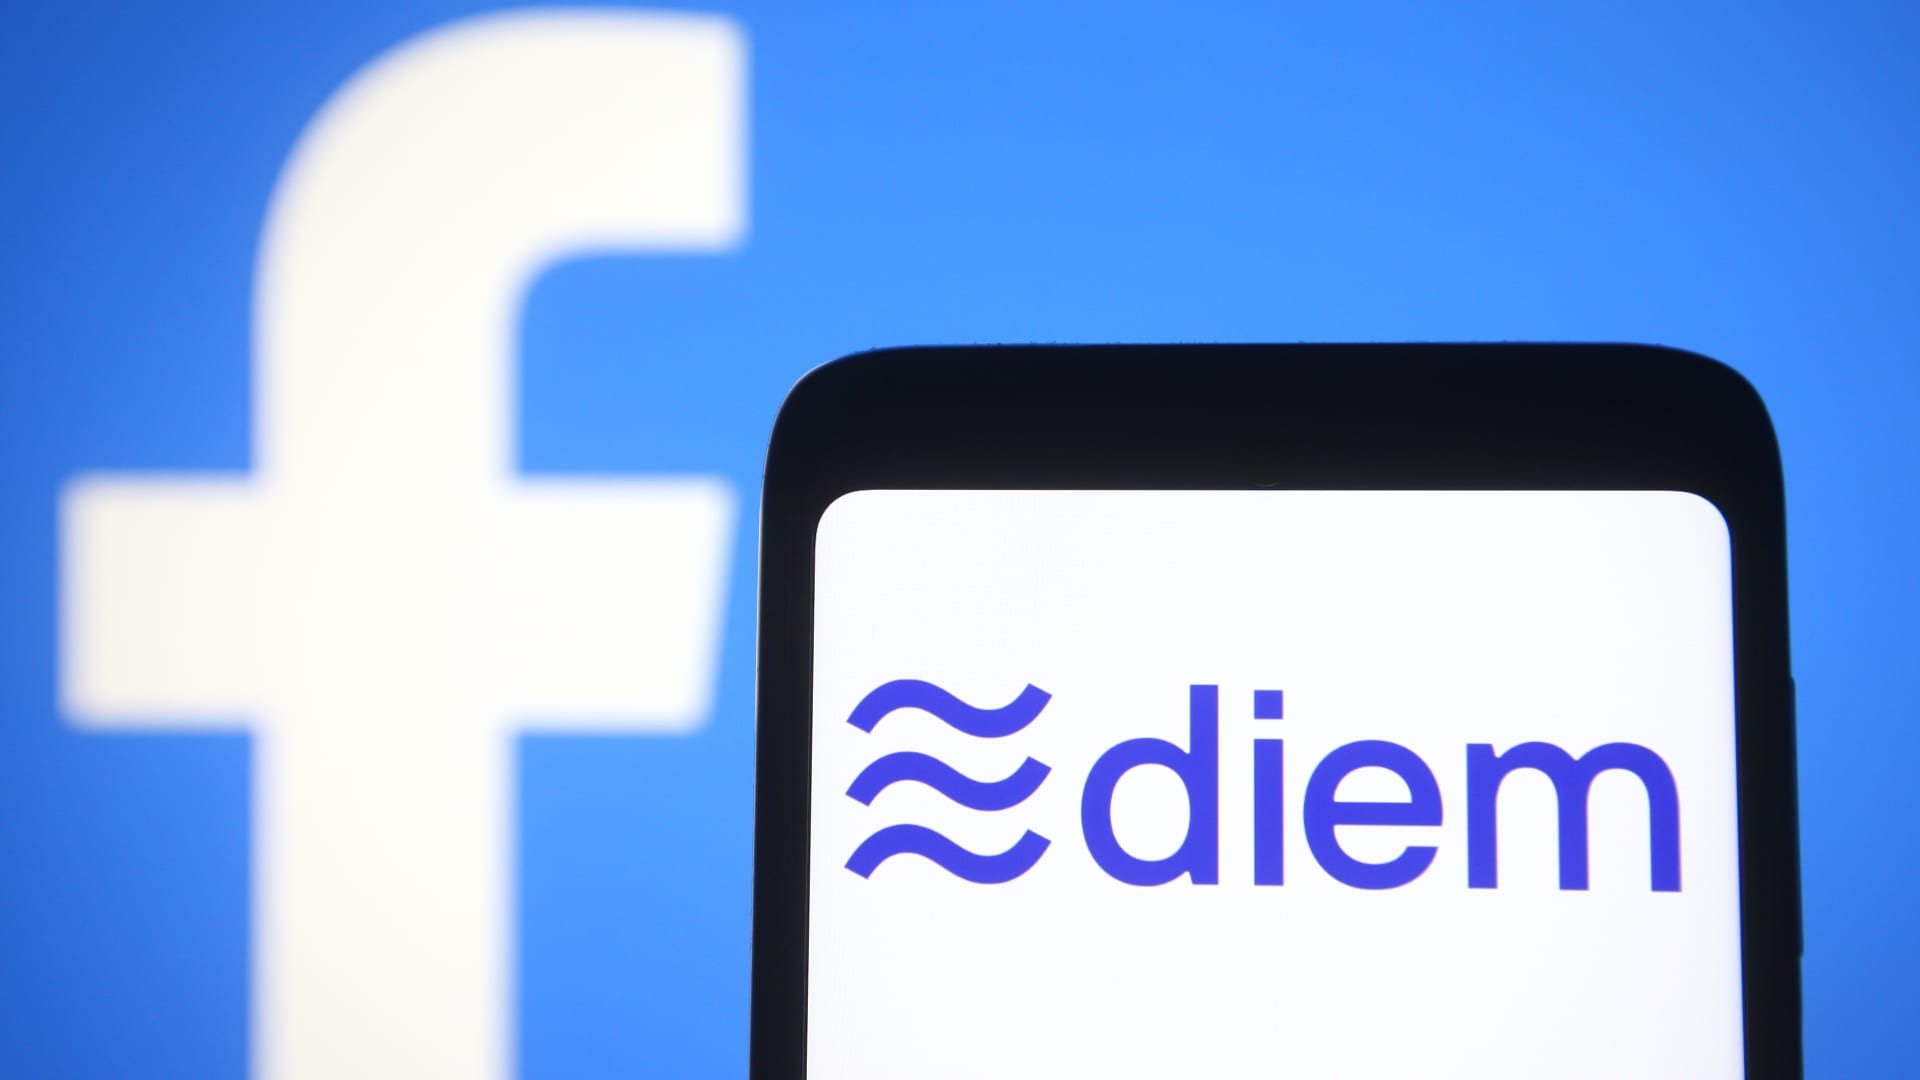 Facebook-backed Diem aims to launch digital currency pilot later this year